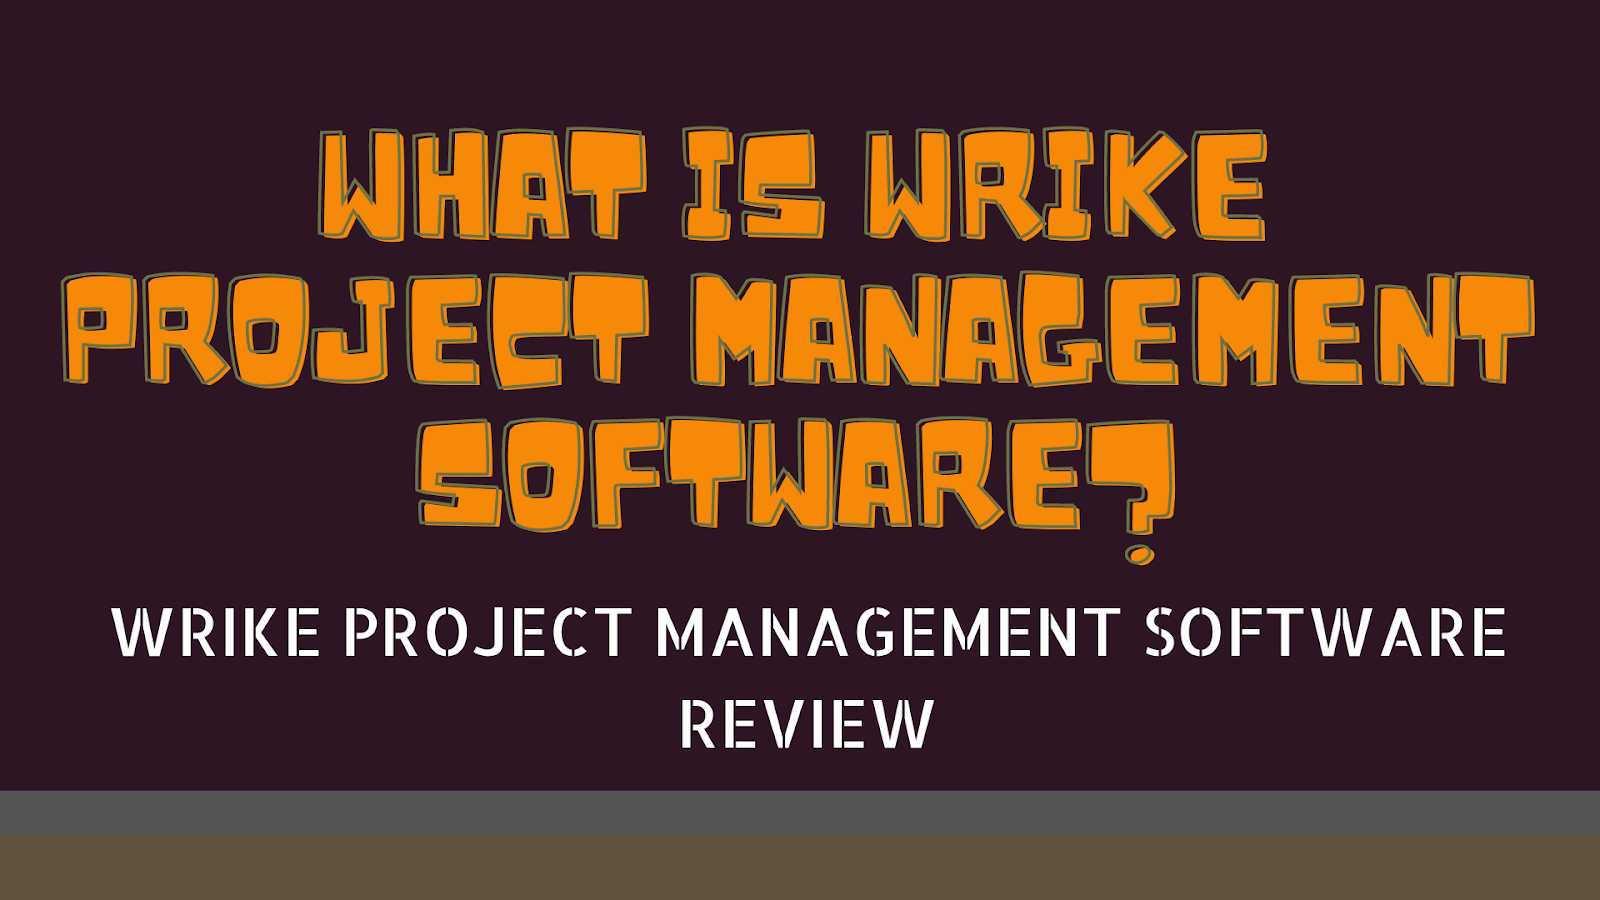 What Is Wrike Project Management Software?